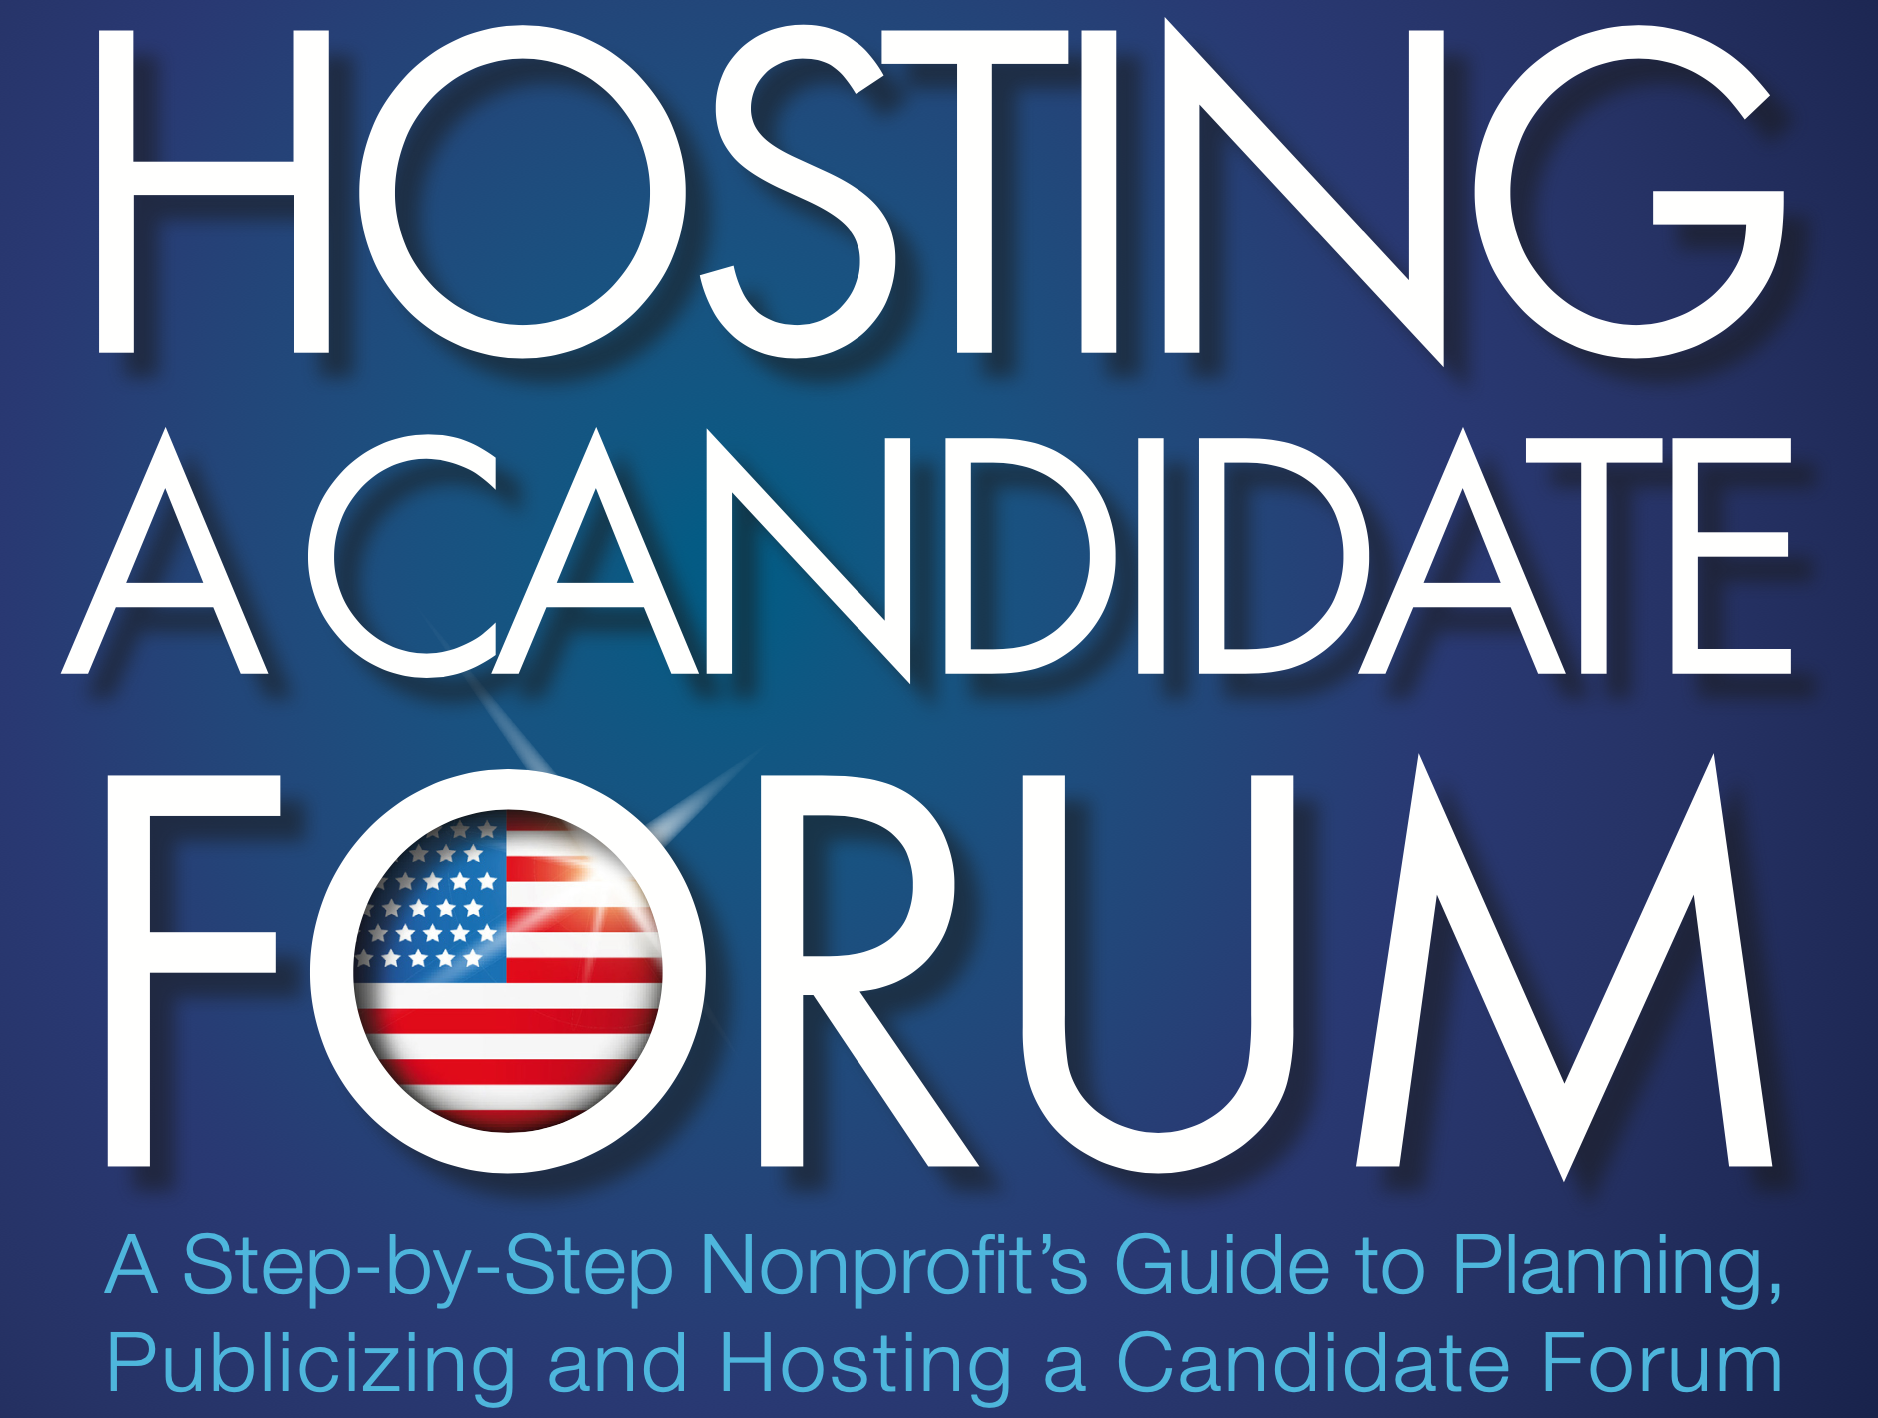 Hosting a Candidate Forum